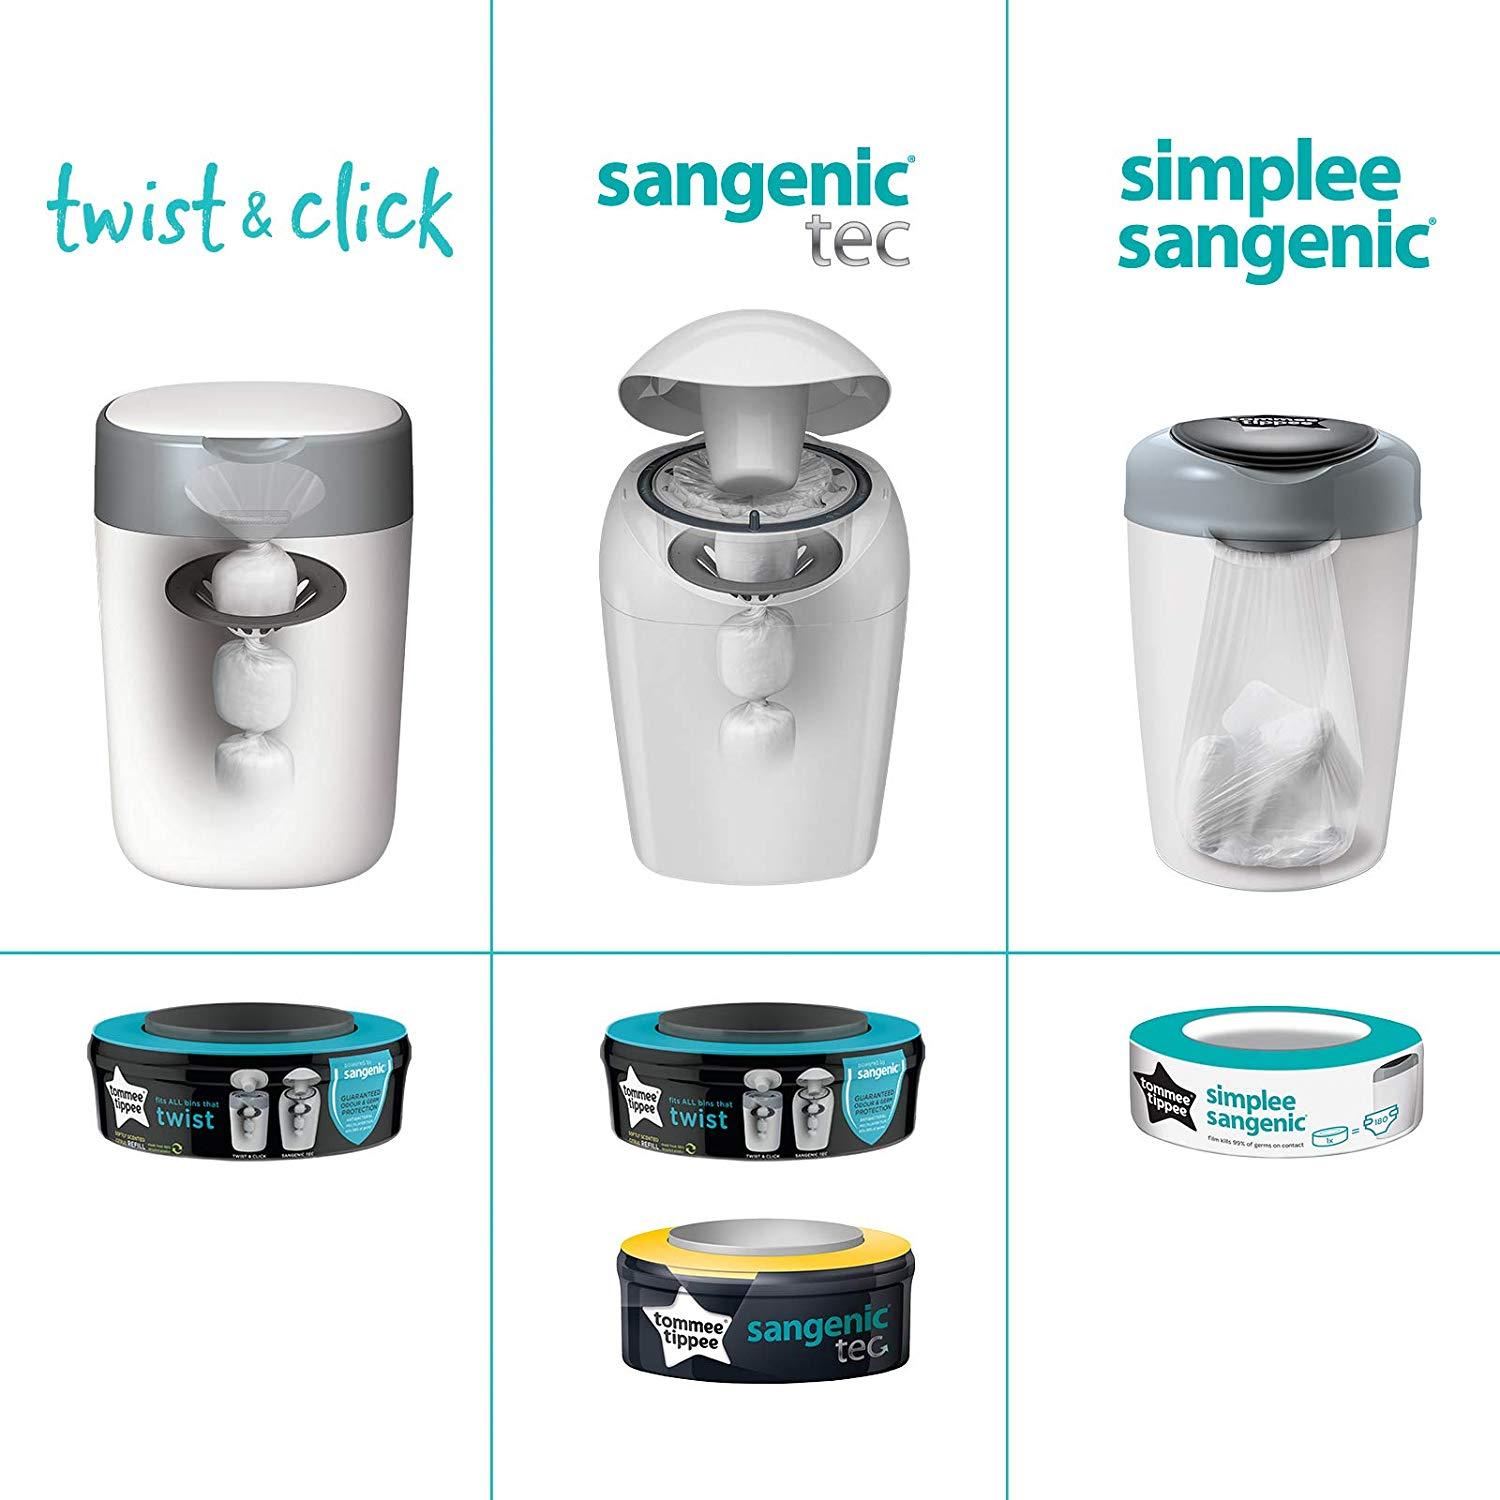 Tommee Tippee Sangenic Lixeira Elimina Odores e Germes Bestseller Anne Claire Baby Store Ltd. 